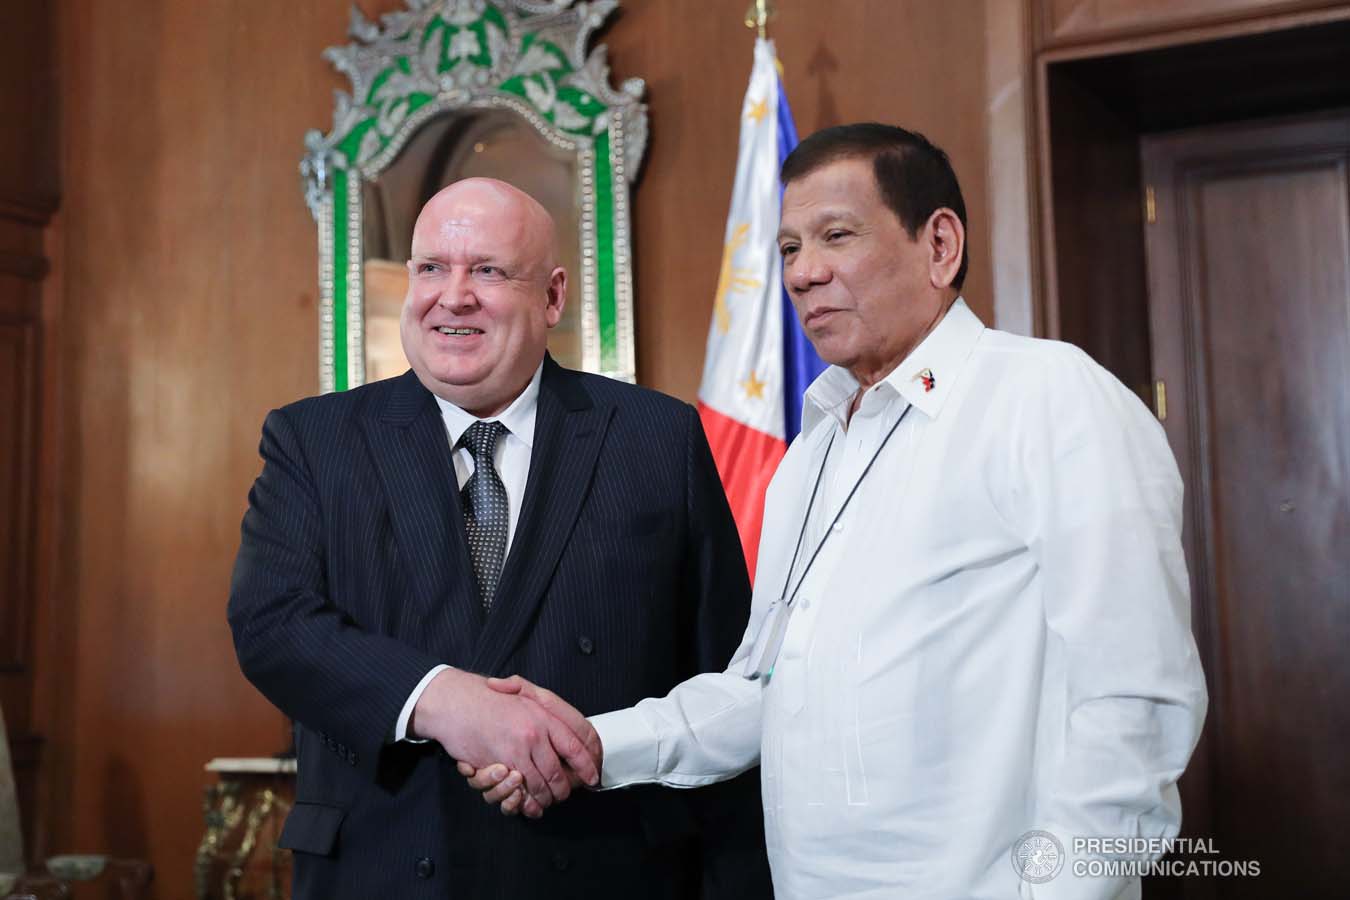 President Rodrigo Roa Duterte poses for posterity with outgoing New Zealand Ambassador to the Philippines David Strachan, who paid a farewell call on the President at the Malacañan Palace on January 27, 2020. ALFRED FRIAS/PRESIDENTIAL PHOTO